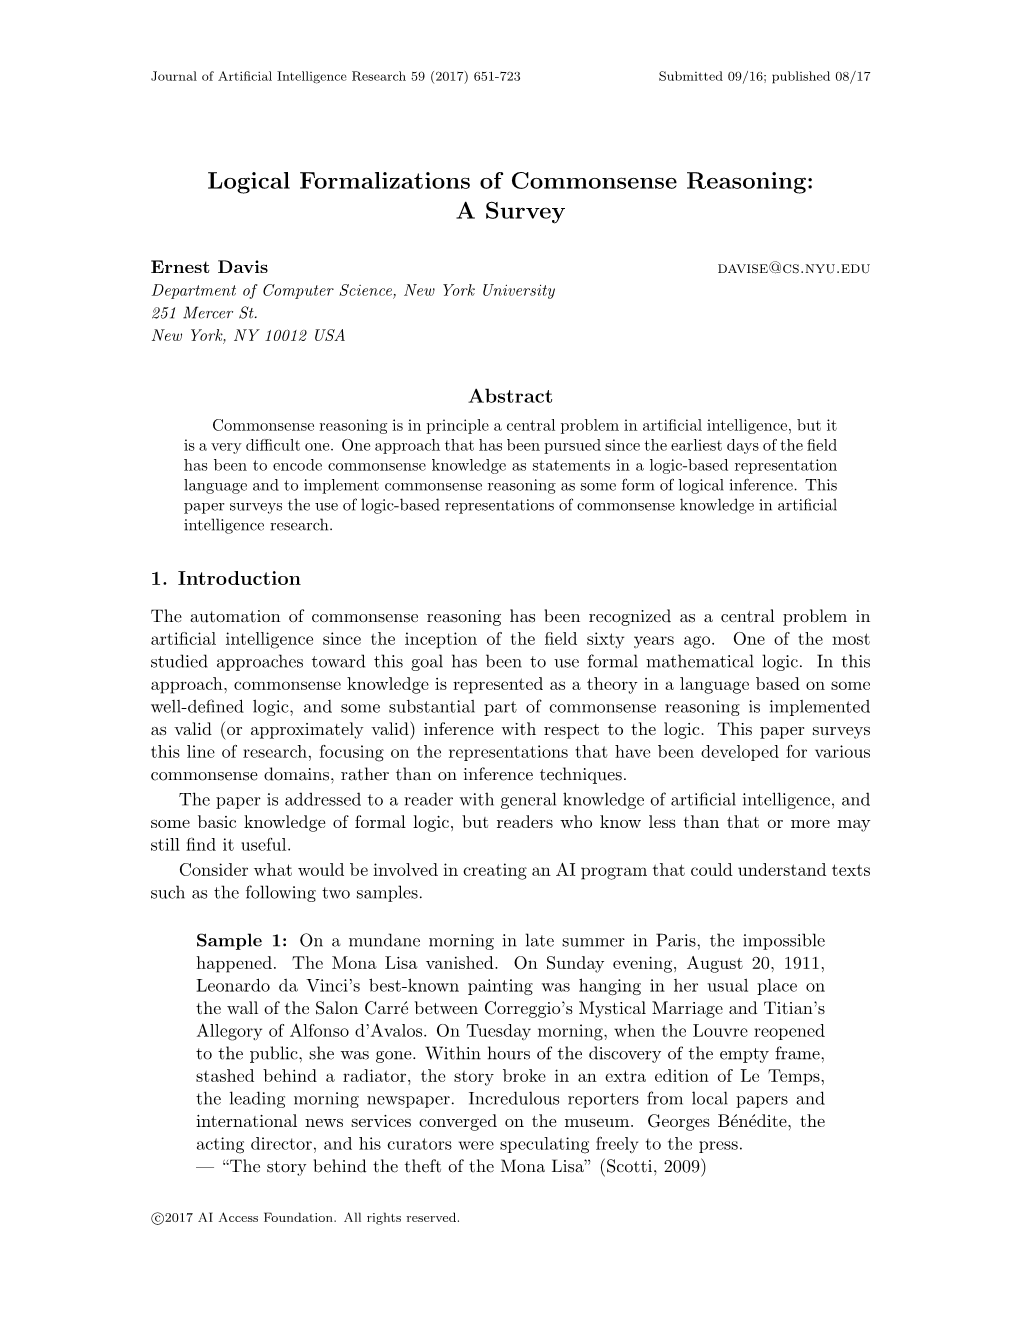 Logical Formalizations of Commonsense Reasoning: a Survey